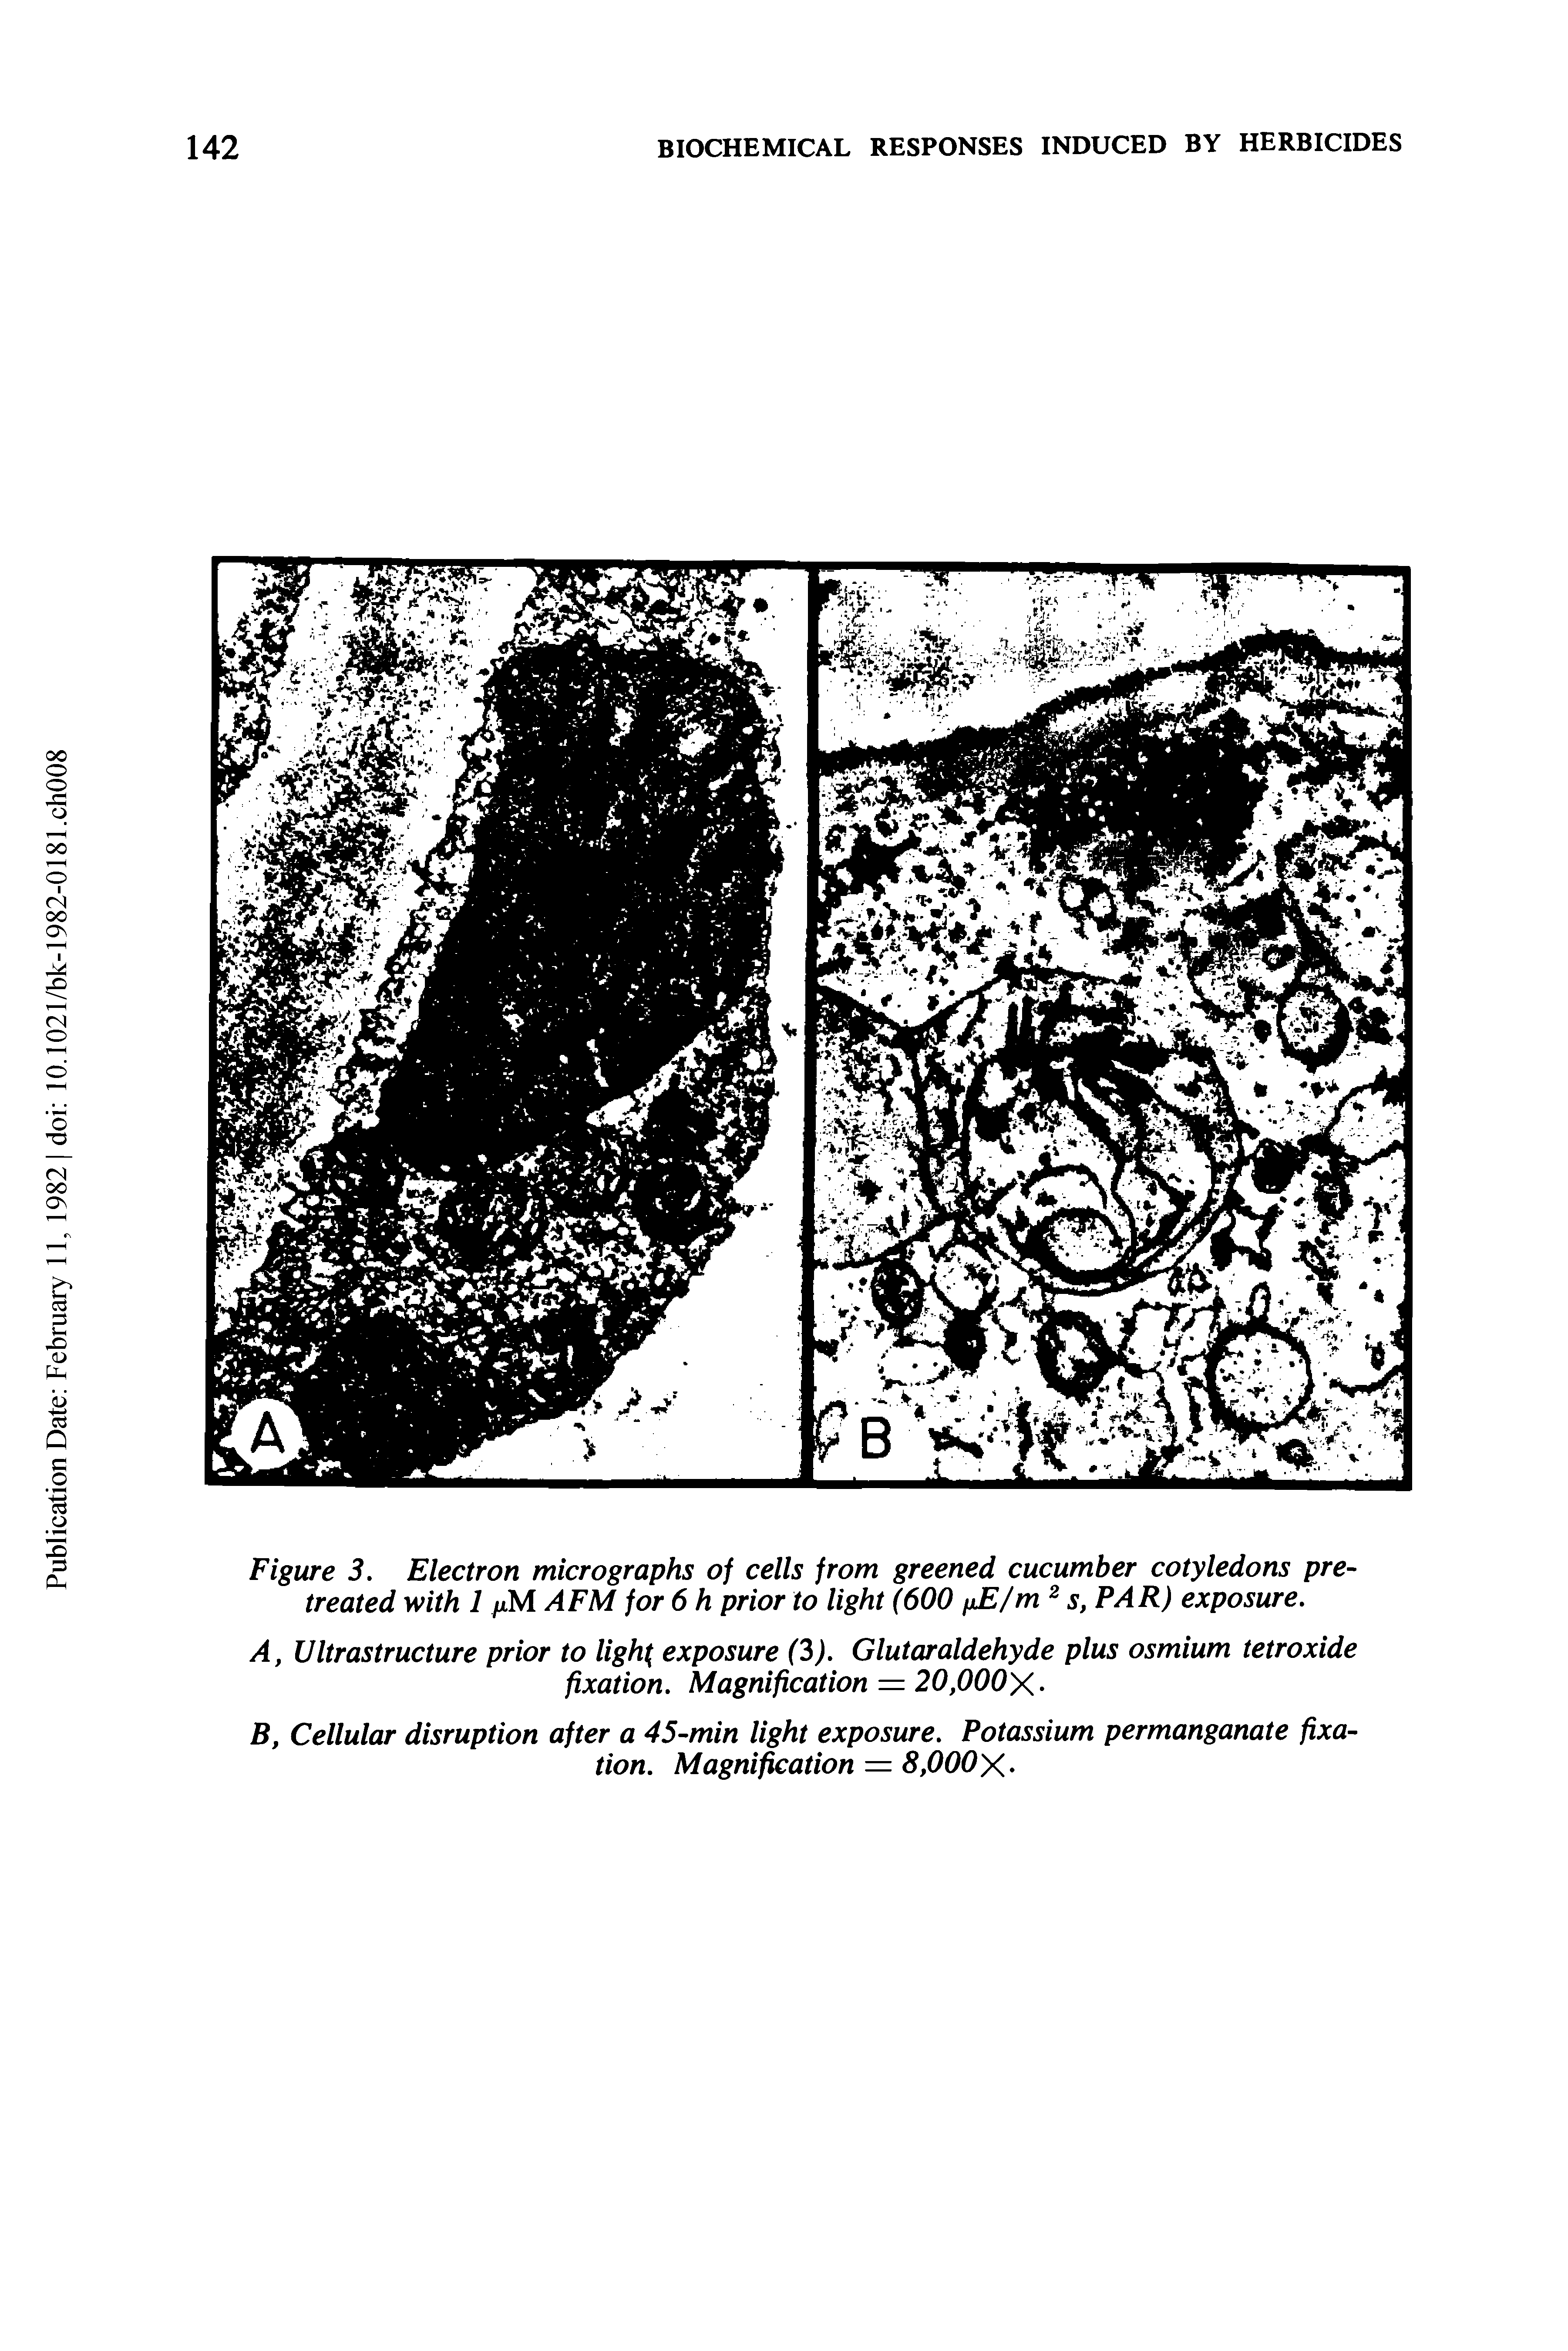 Figure 3. Electron micrographs of cells from greened cucumber cotyledons pretreated with 1 fxM AFM for 6 h prior to light (600 fiE/m s, PAR) exposure.